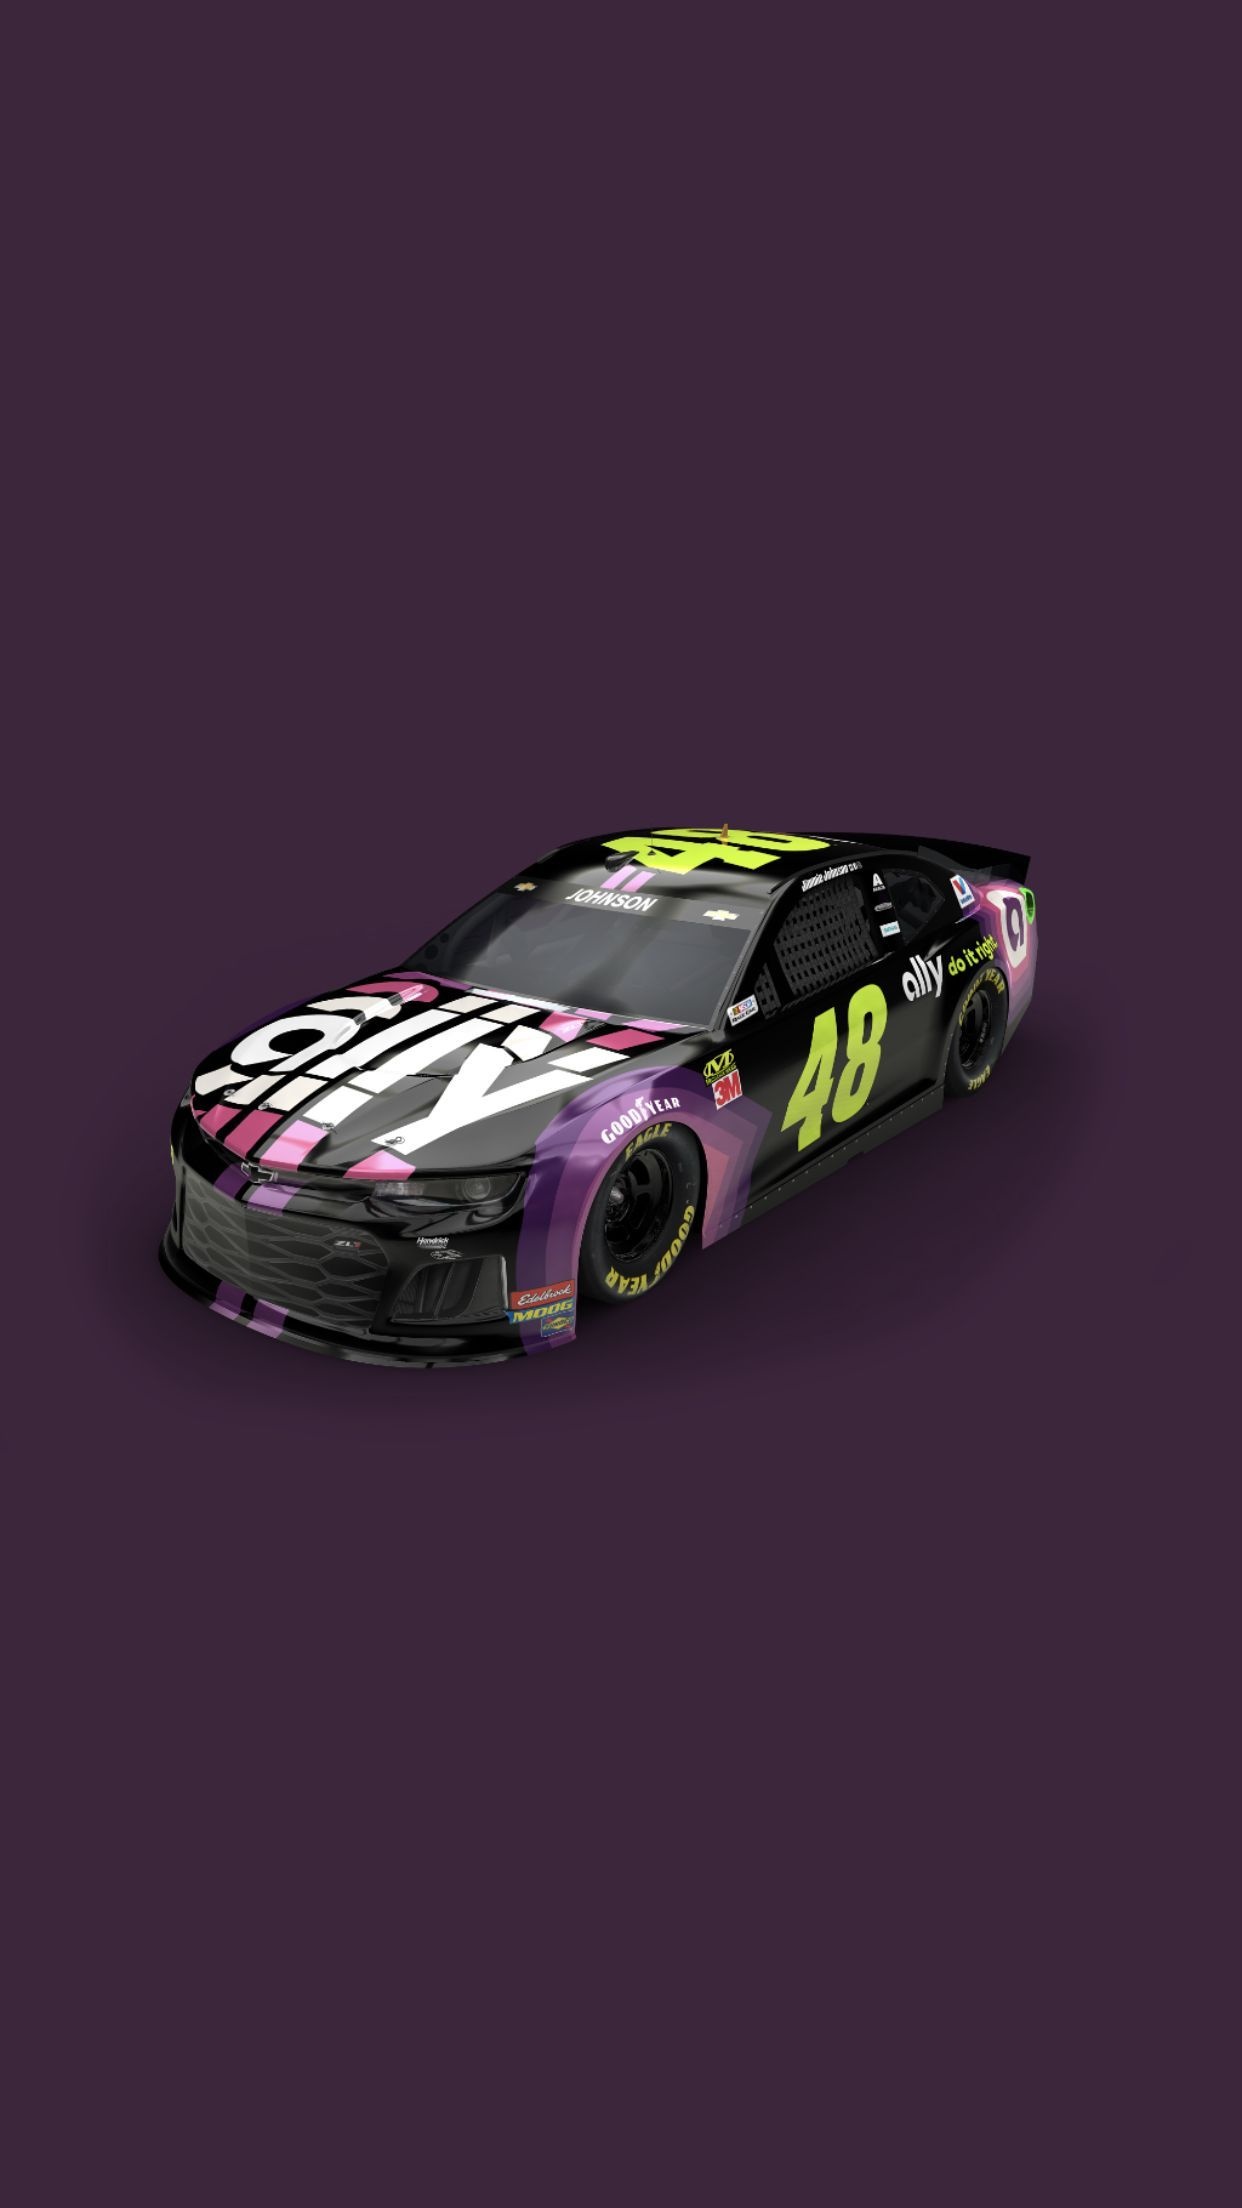 Jimmie Johnson, Racing wallpapers, Top-tier driver, Sports backgrounds, 1250x2210 HD Handy